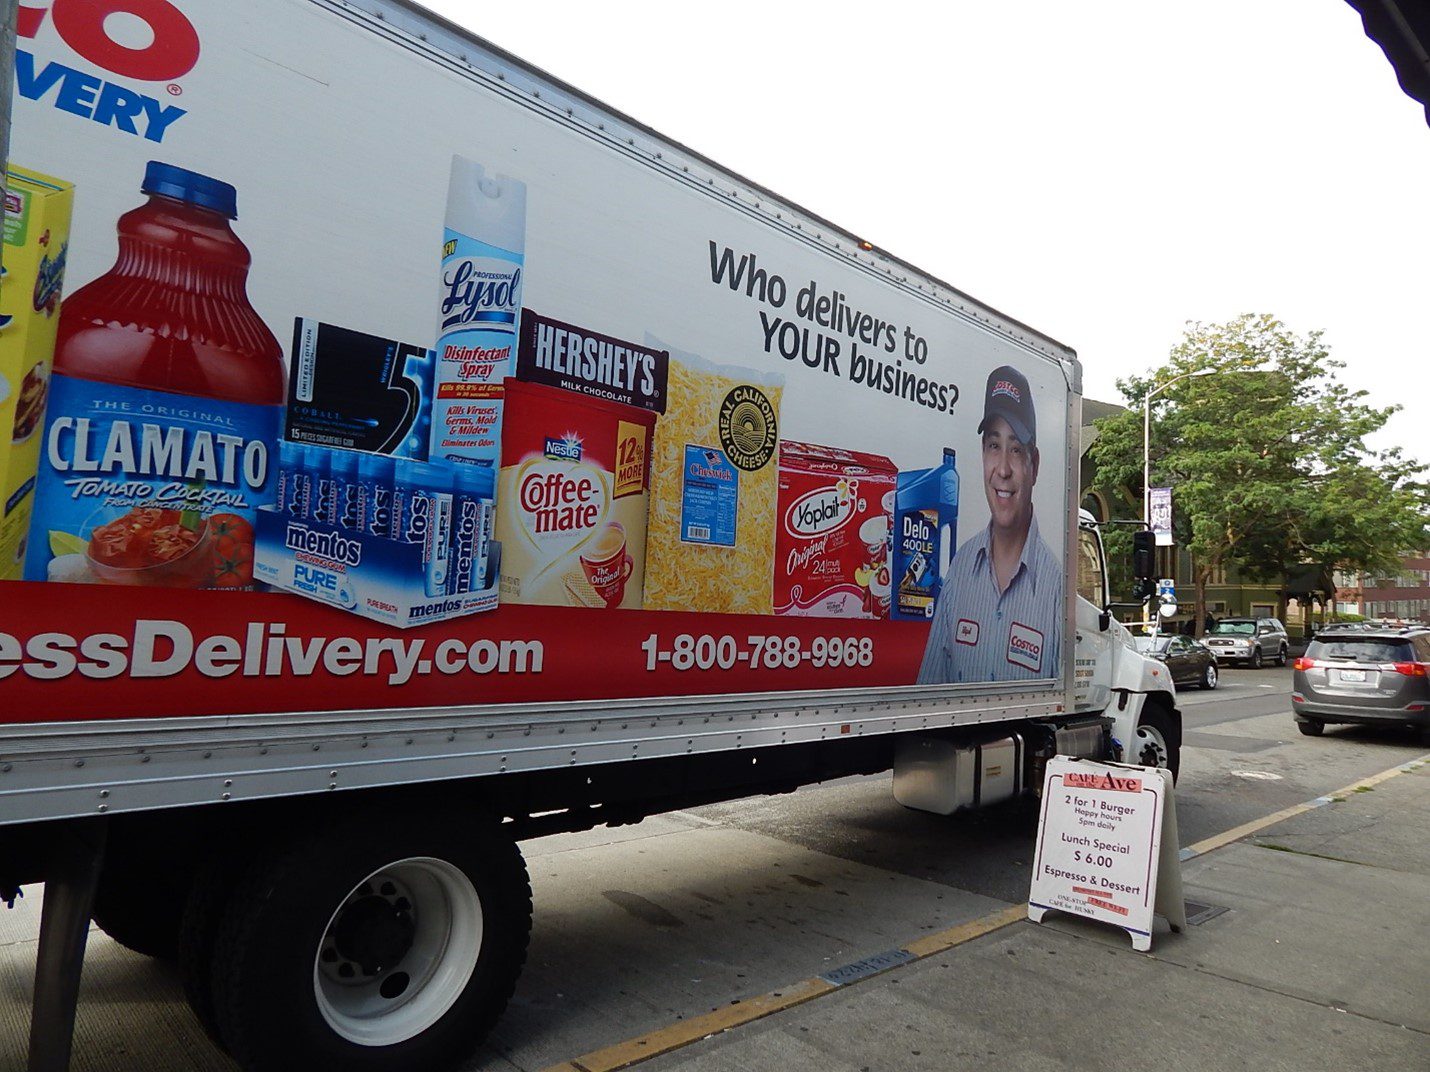 A large delivery truck parked curbside on a cloudy day. Pictures of products and a person are on the side of the truck, as well as a small sandwich board side on the curb.